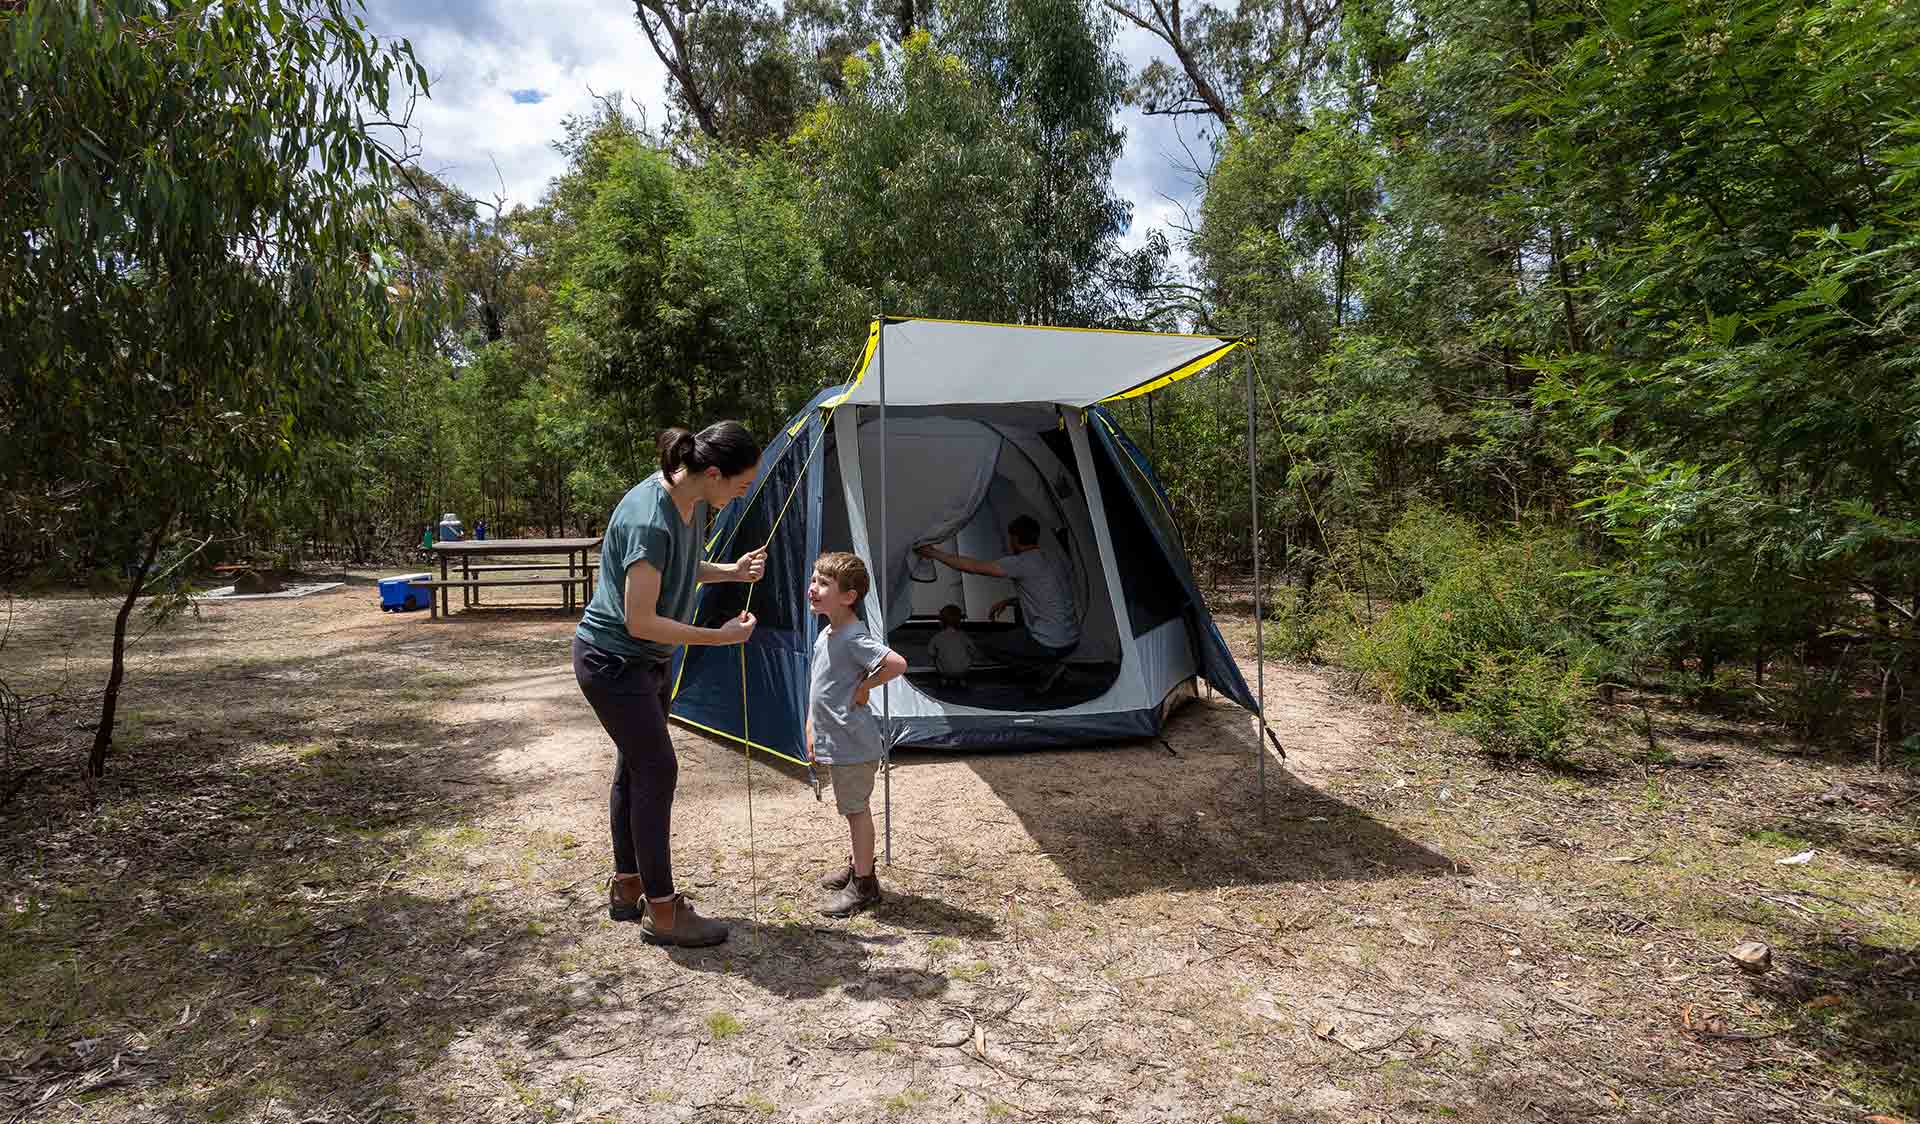 Mother and her young son finish off setting up their tent at Troopers Creek Campground at the Grampians National Park